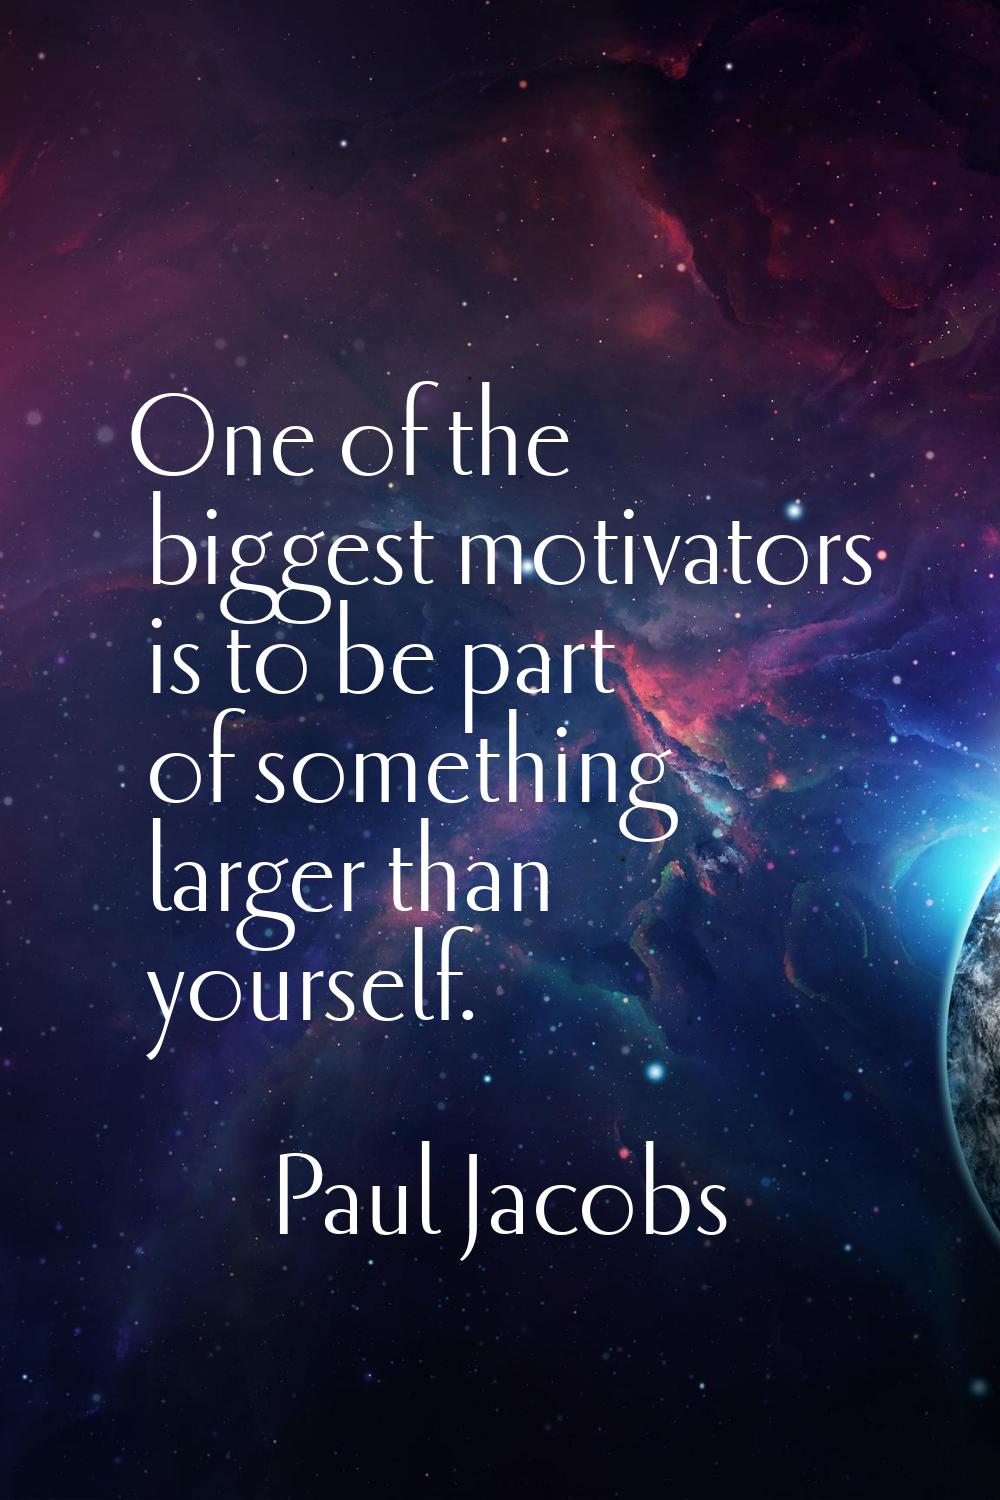 One of the biggest motivators is to be part of something larger than yourself.